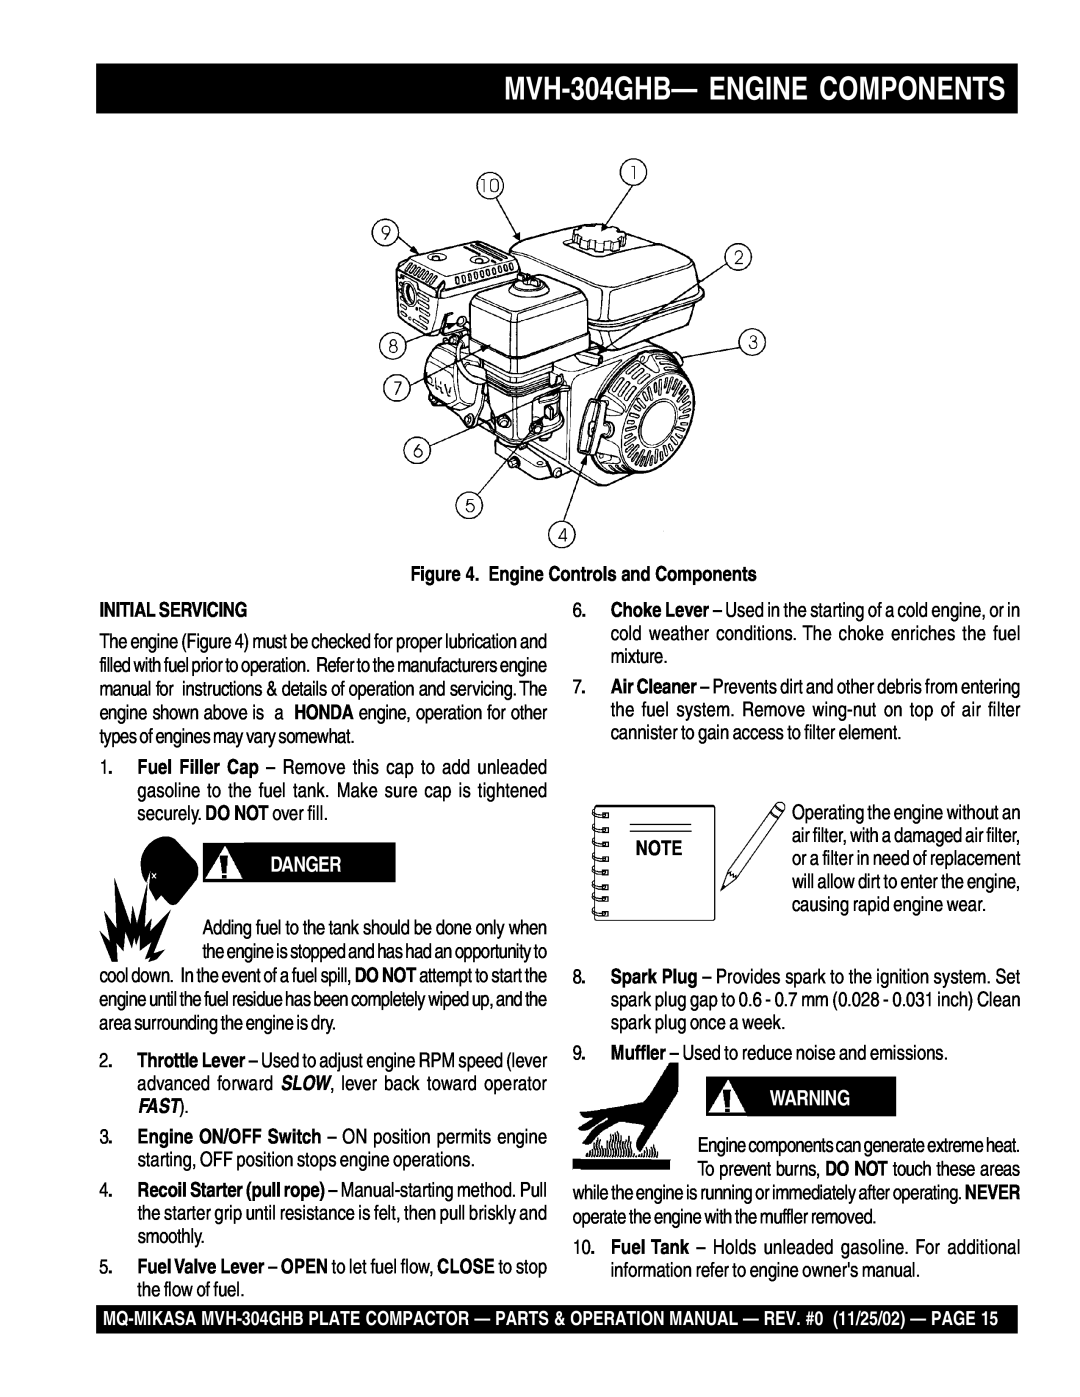 Multiquip operation manual MVH-304GHB-ENGINE COMPONENTS, Danger, Engine Controls and Components, Initial Servicing 